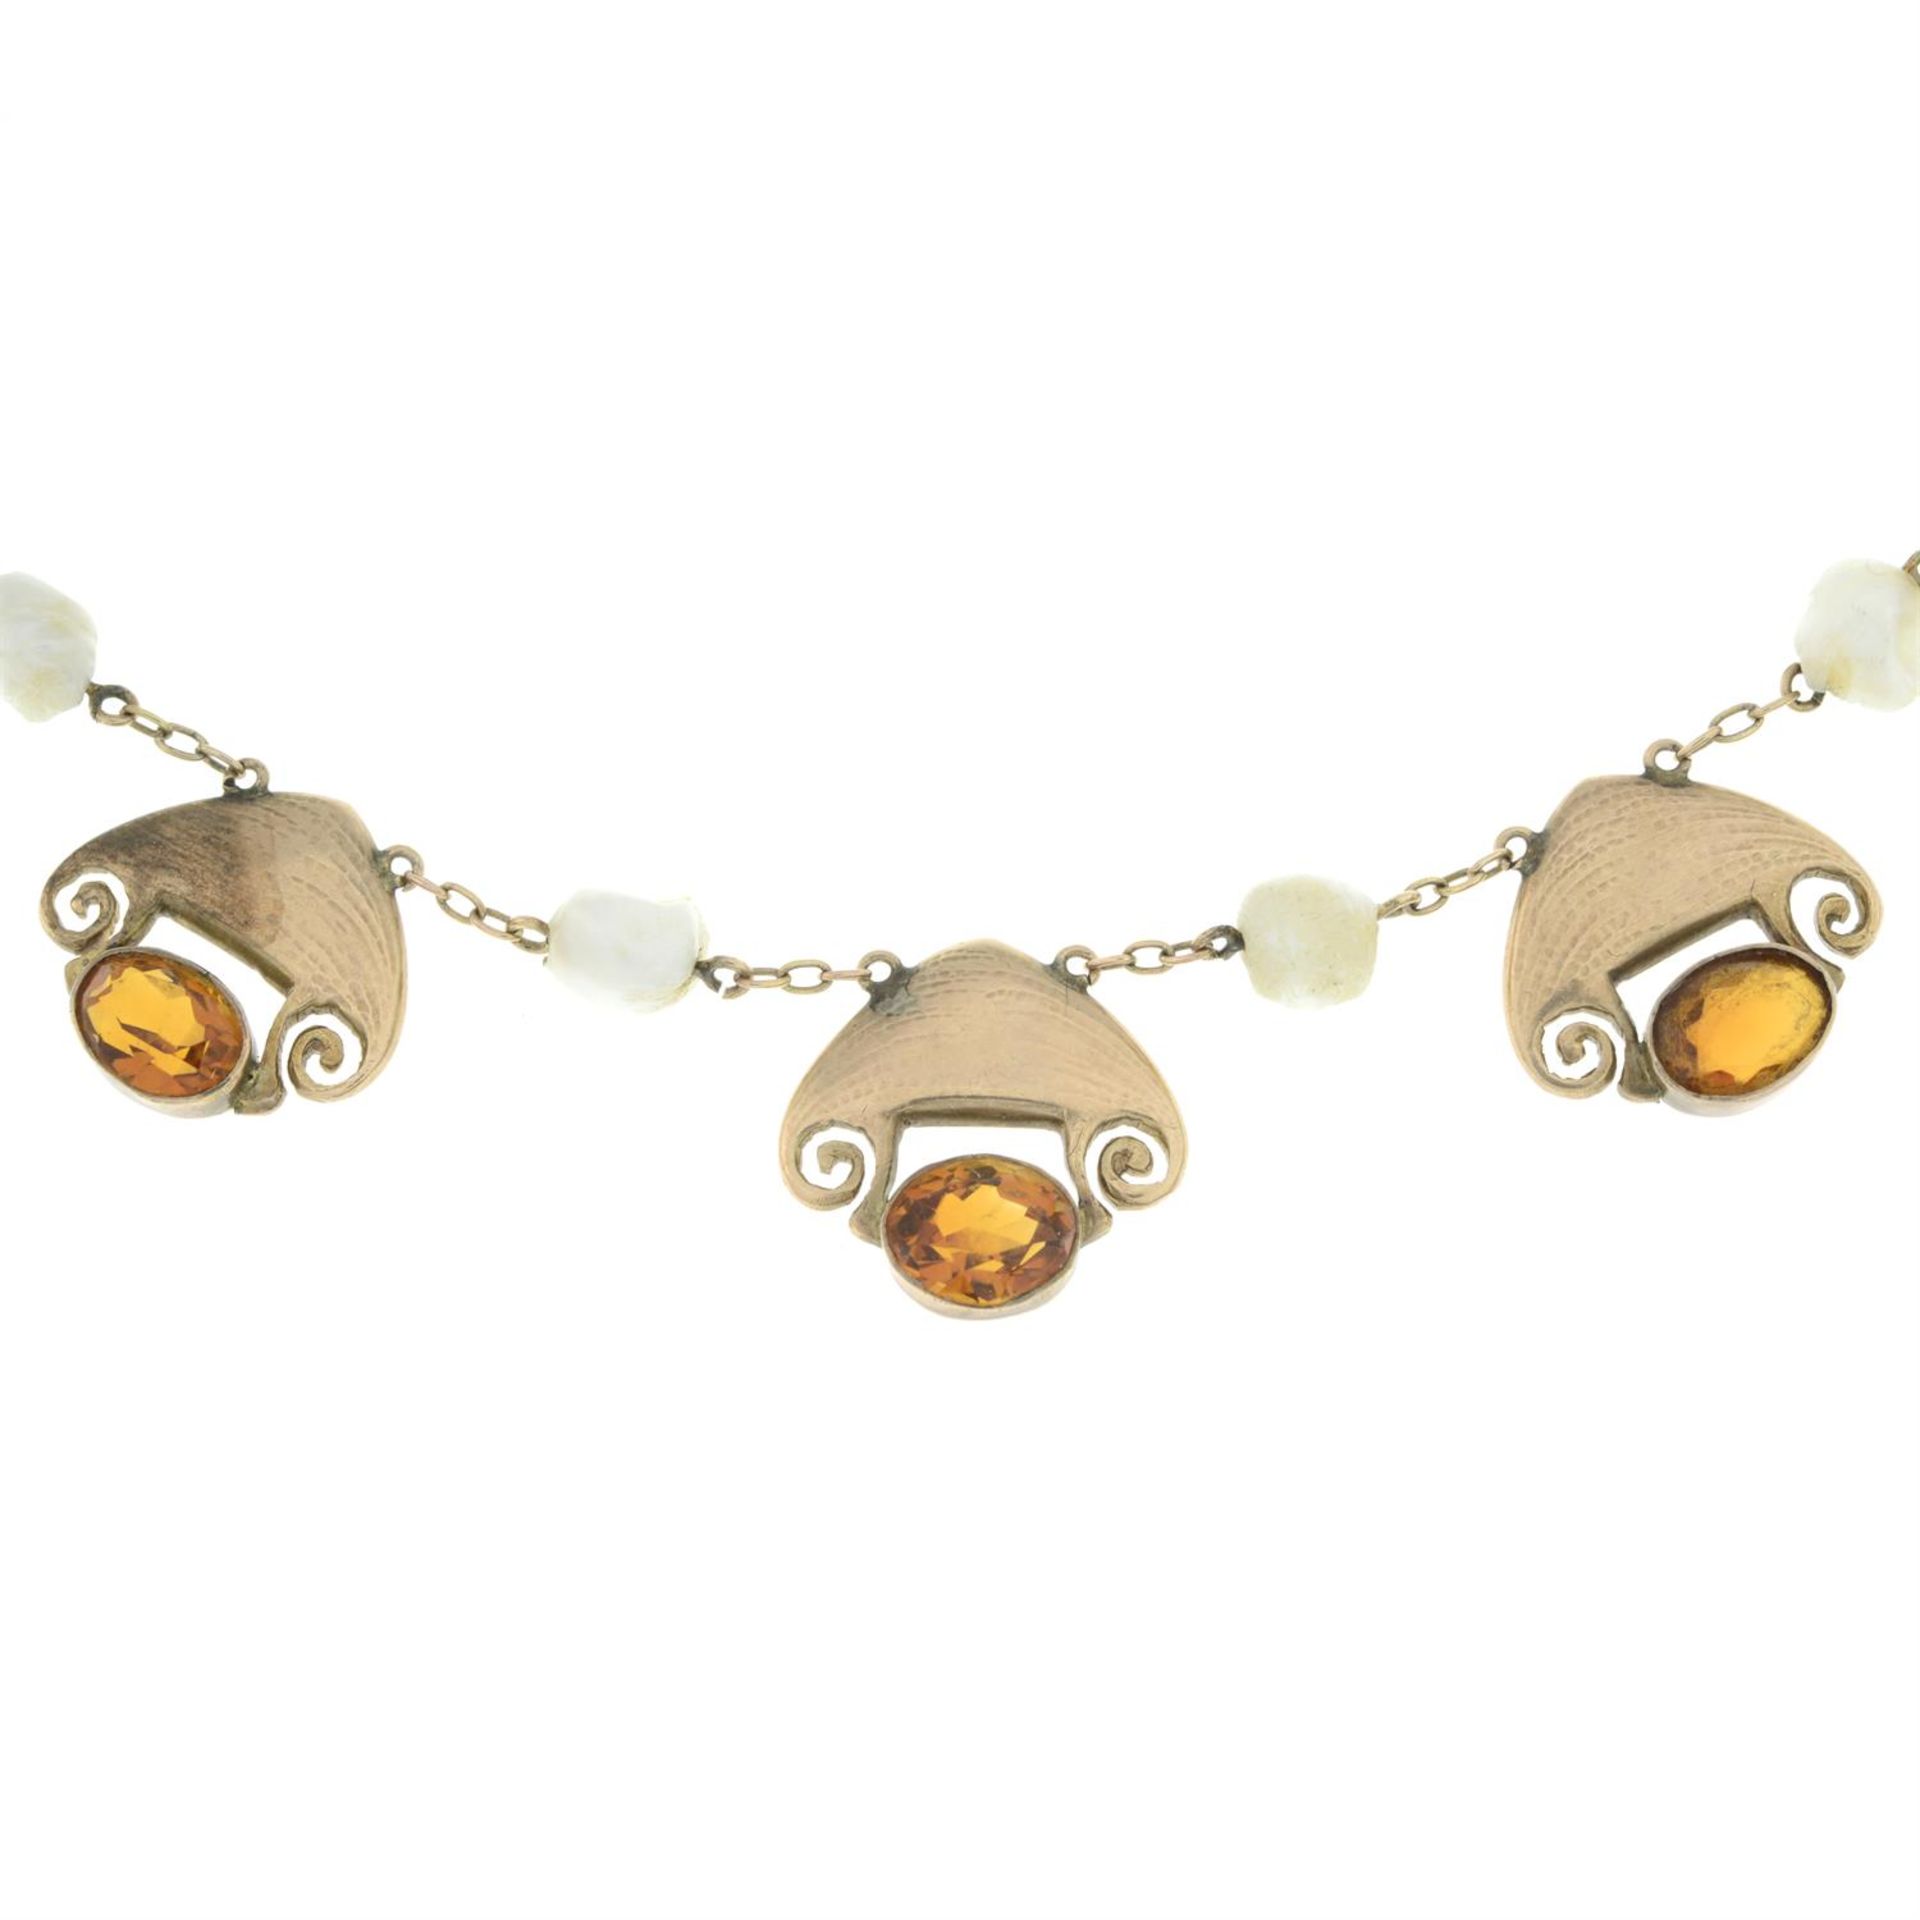 Citrine and baroque pearl necklace, by Liberty & Co. - Image 4 of 6